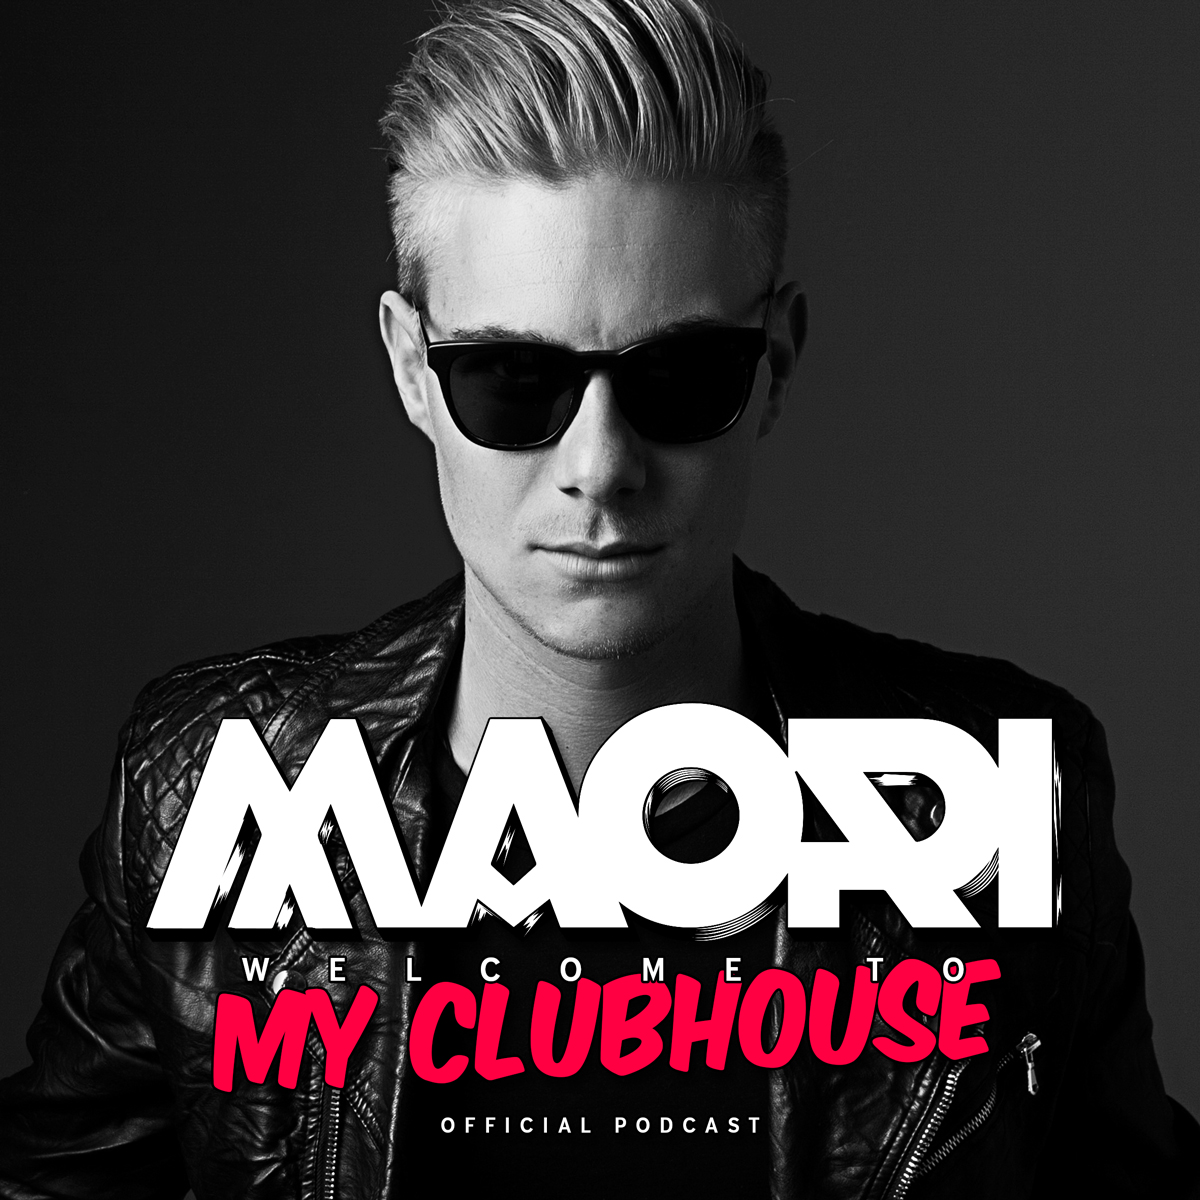 My Clubhouse by Maori - Podcast #033